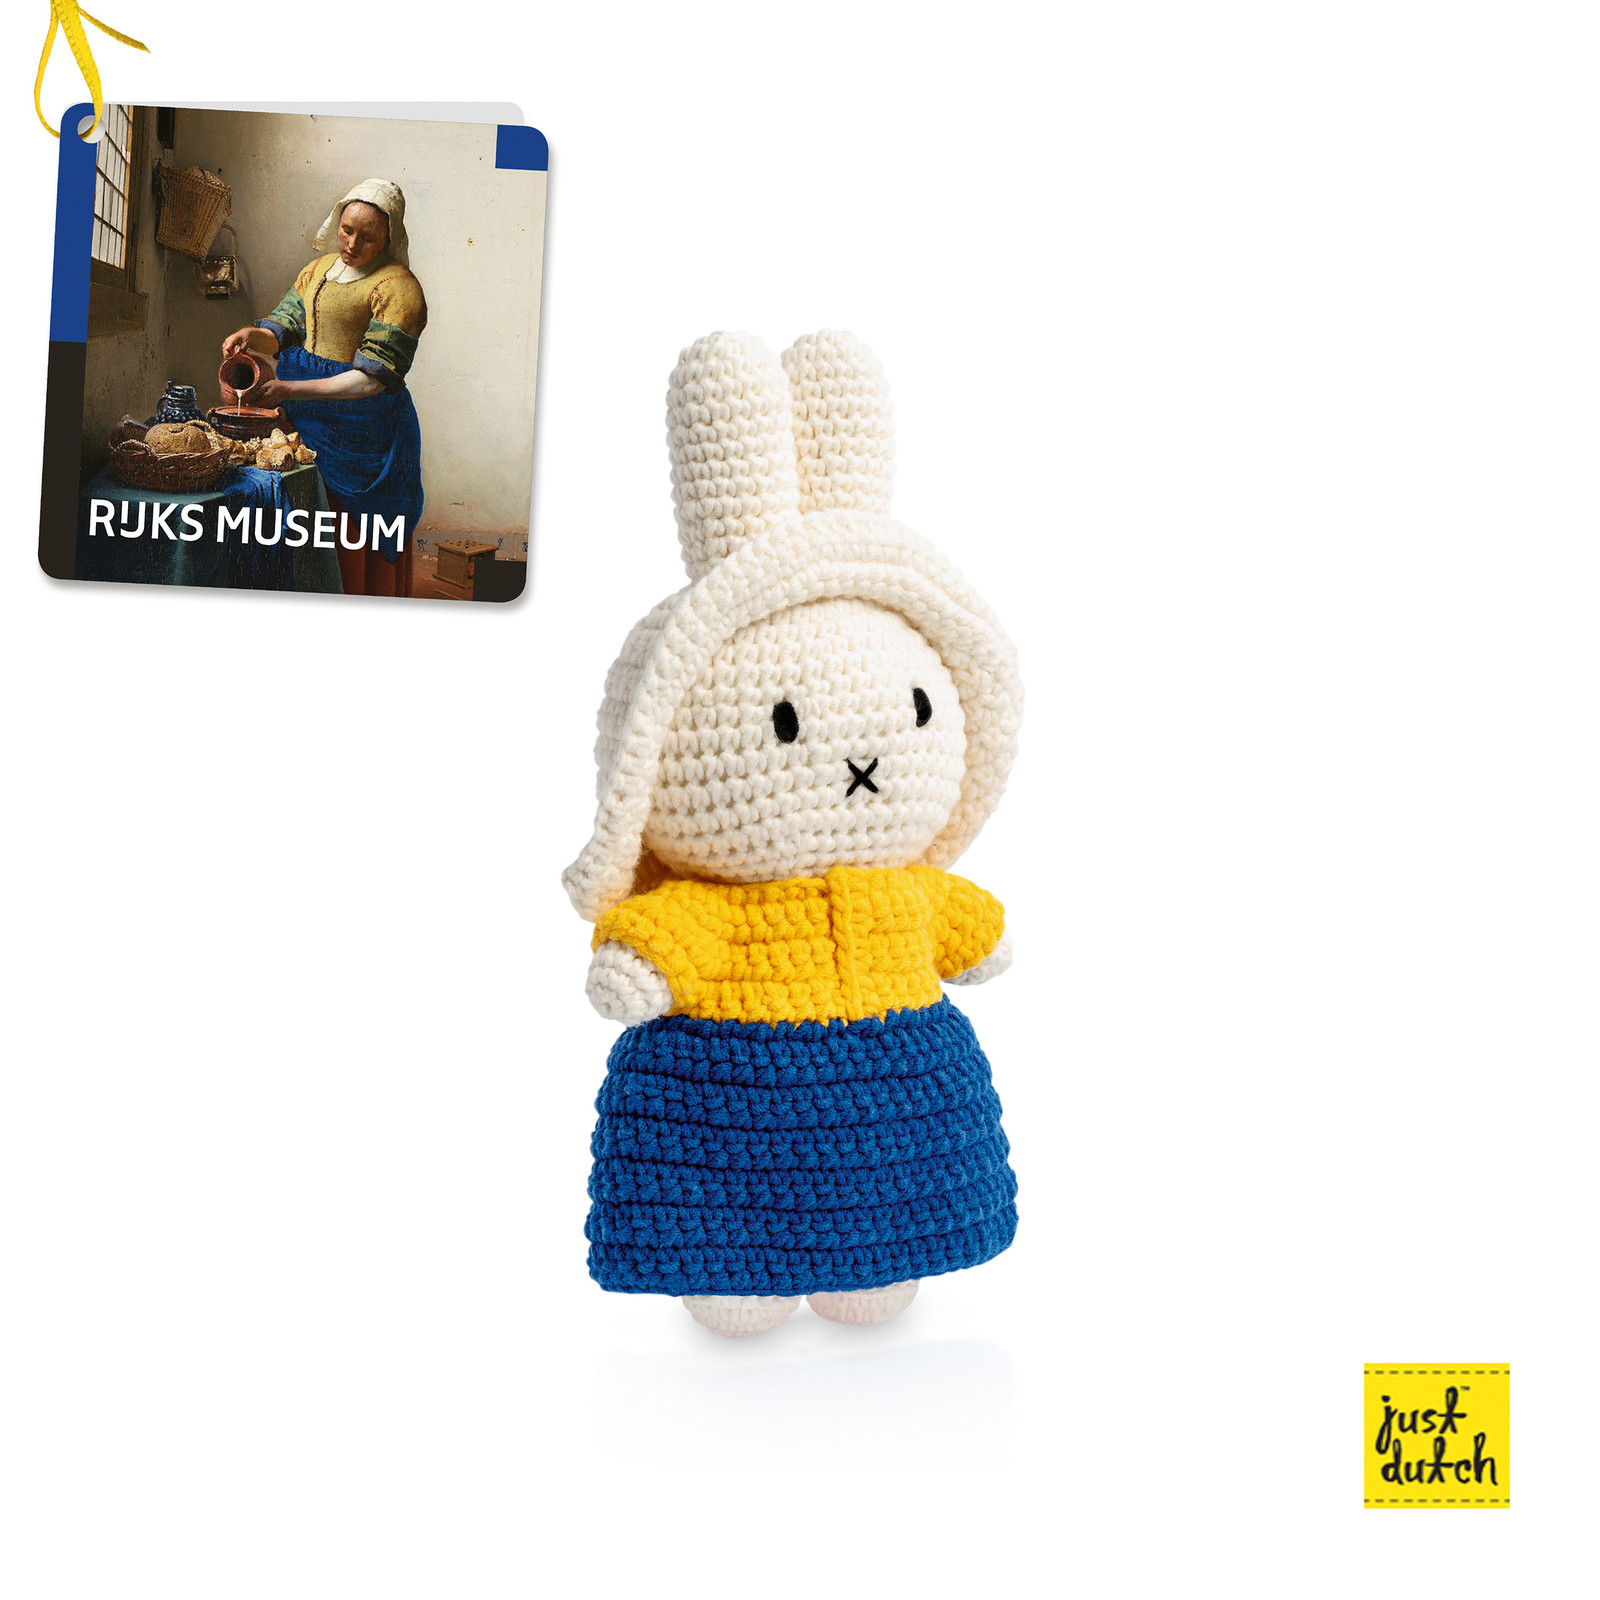 Miffy handmade and her Rijksmuseum milkmaid outfit